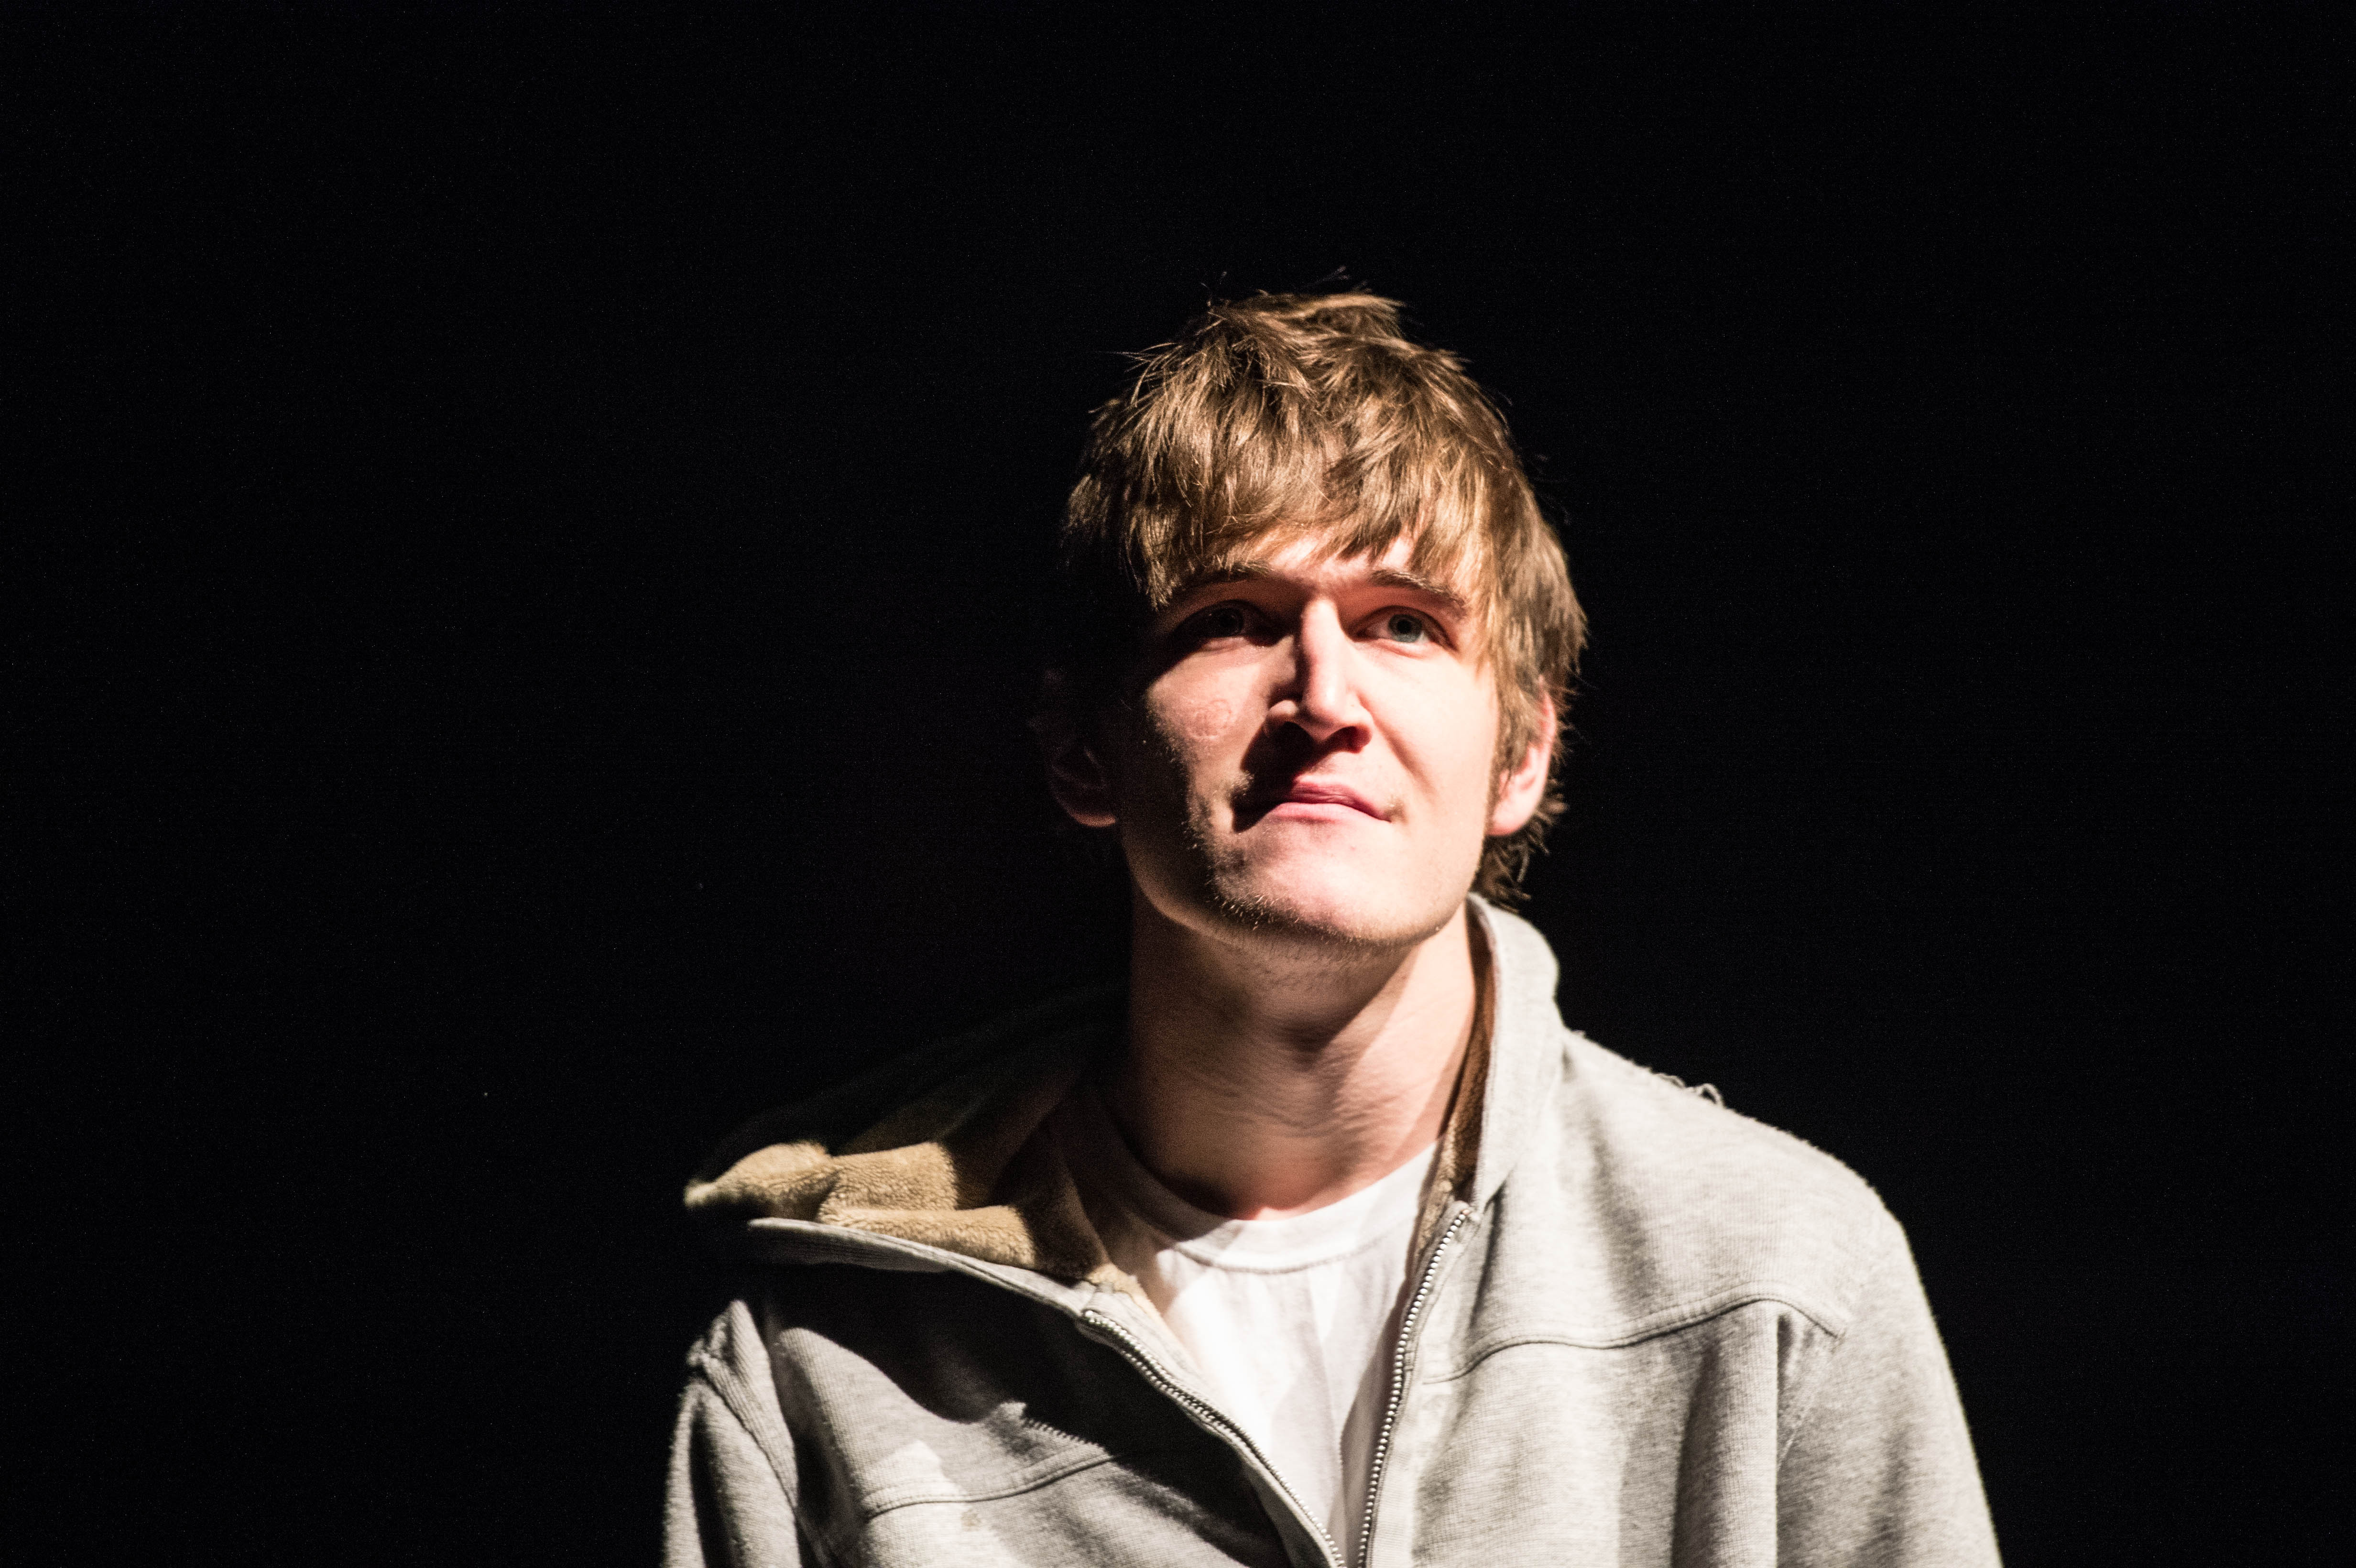 Download free Wallpapers of Bo Burnham in high resolution and high quality....